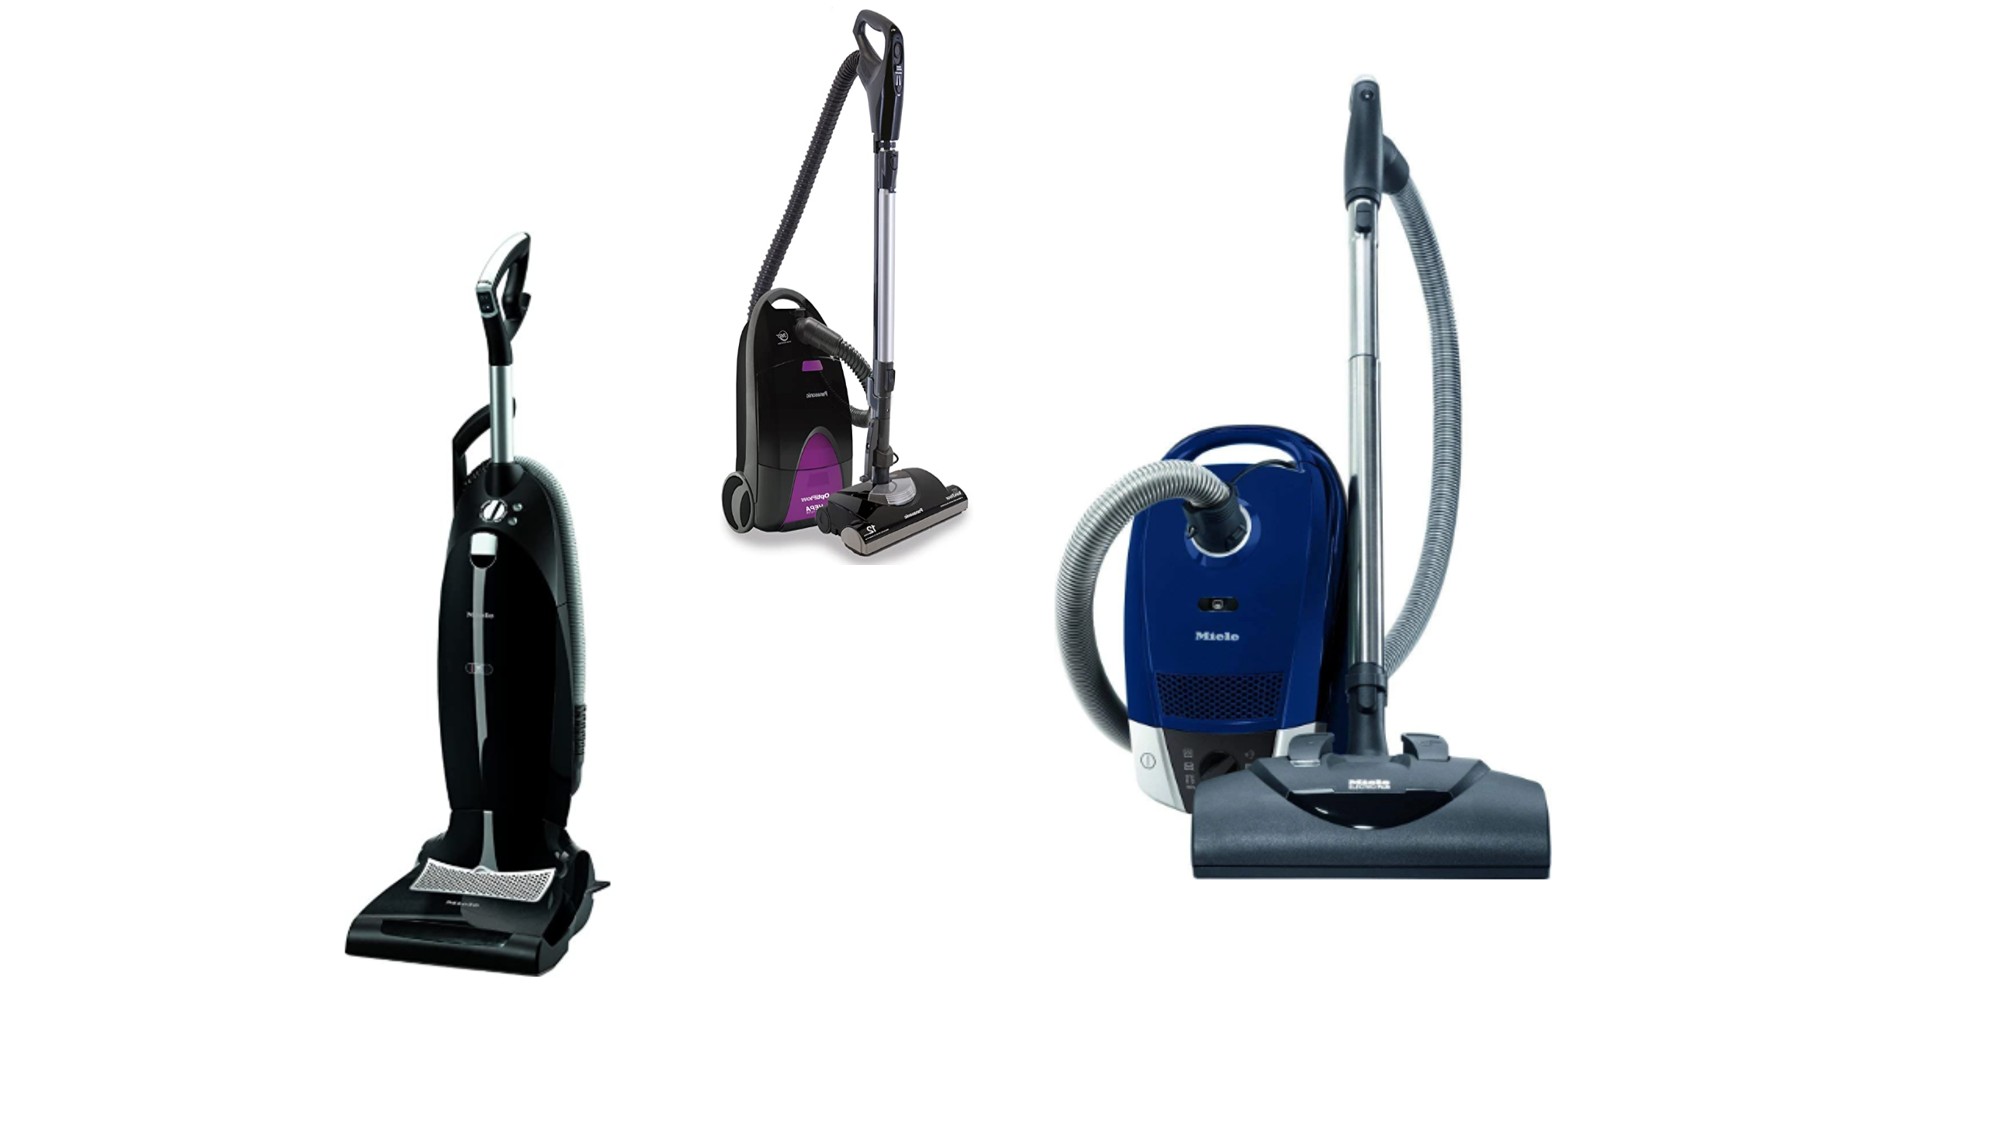 Top Buy It for Life Vacuums